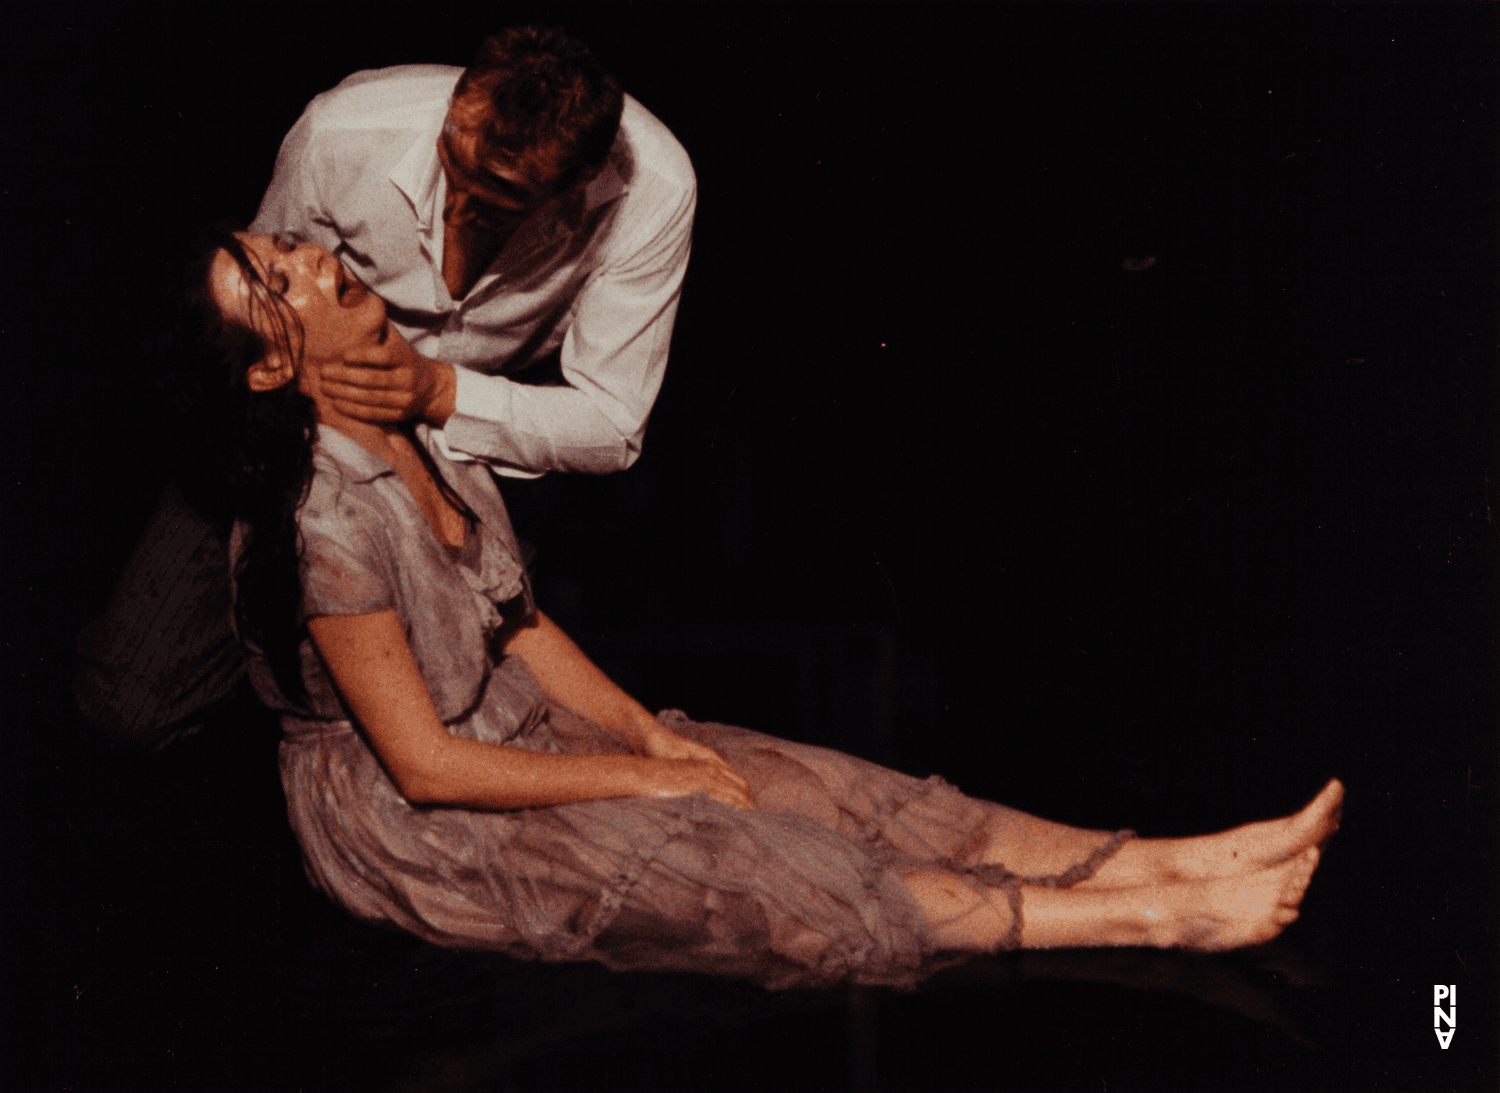 Dominique Mercy and Josephine Ann Endicott in “Arien” by Pina Bausch